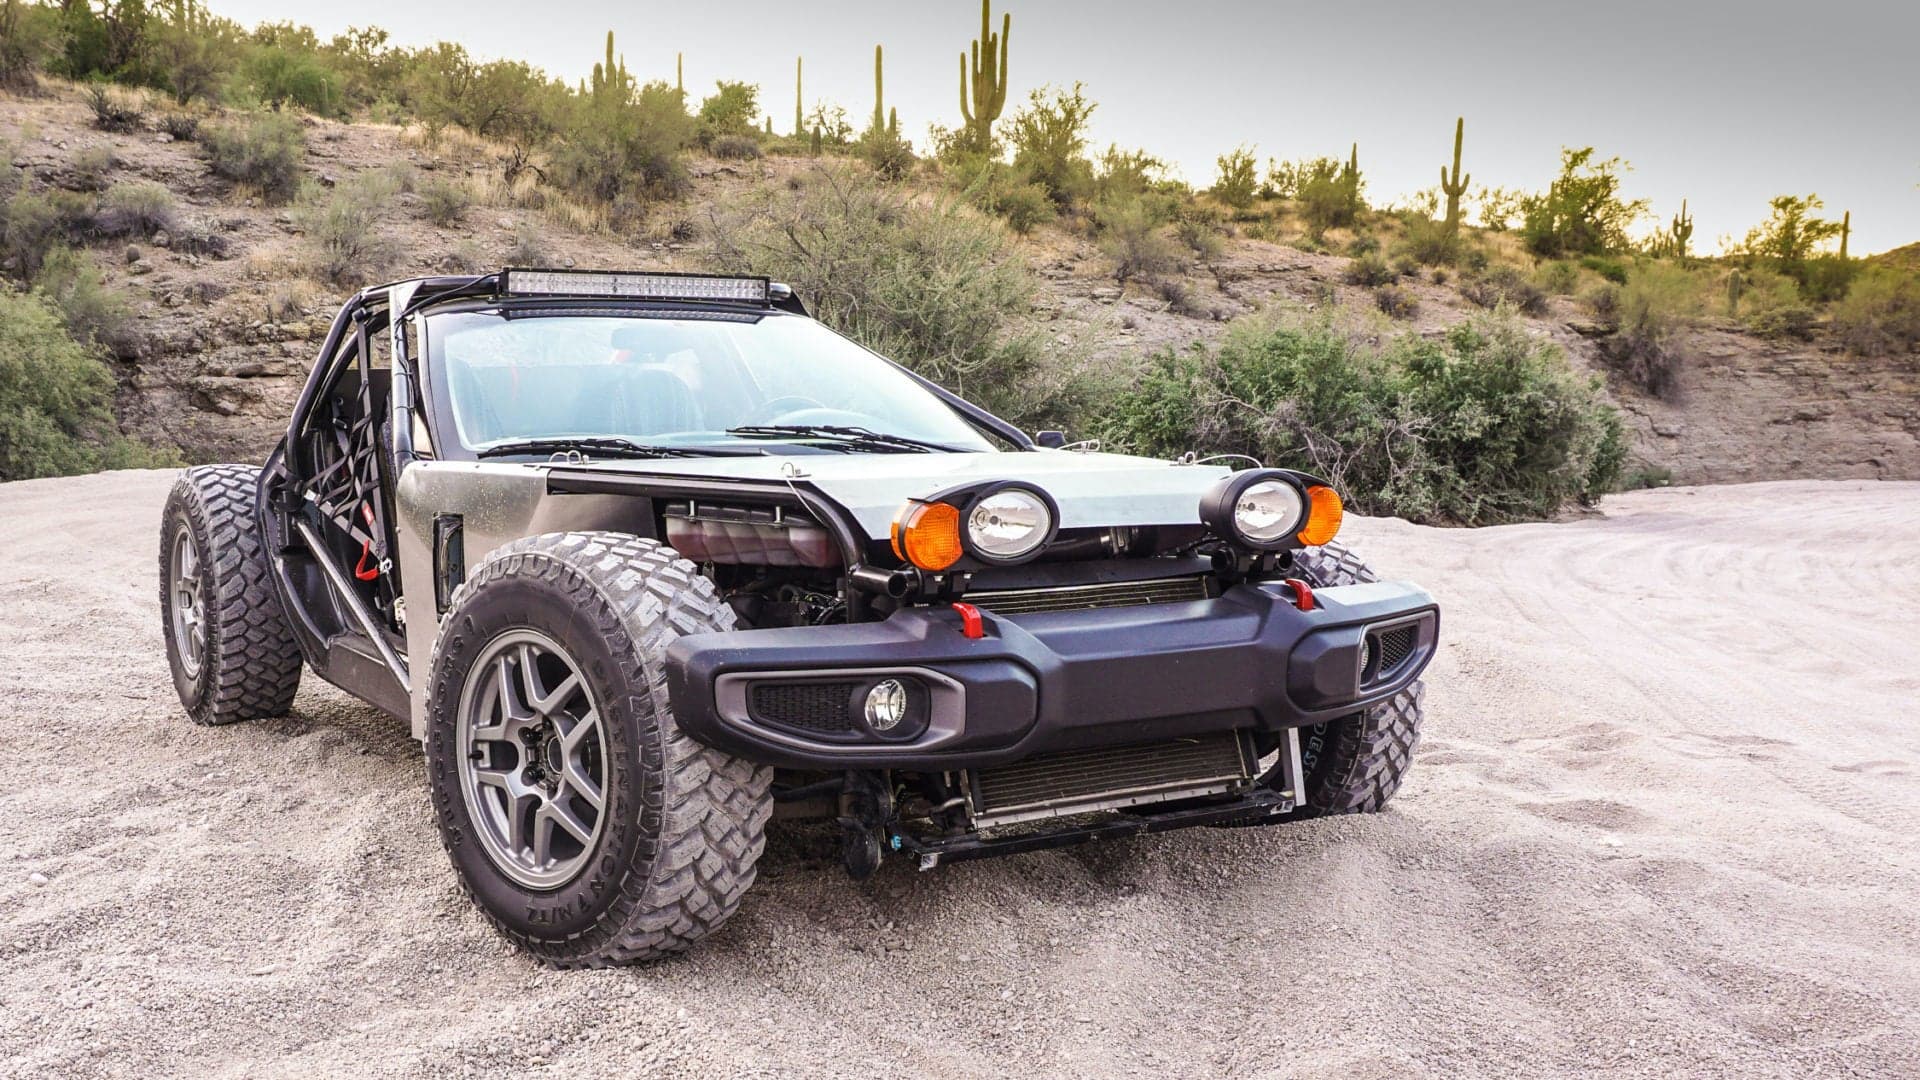 This Stripped-Out C5 Corvette Dune Buggy Isn’t Your Dad’s Mid-Life Crisis Car